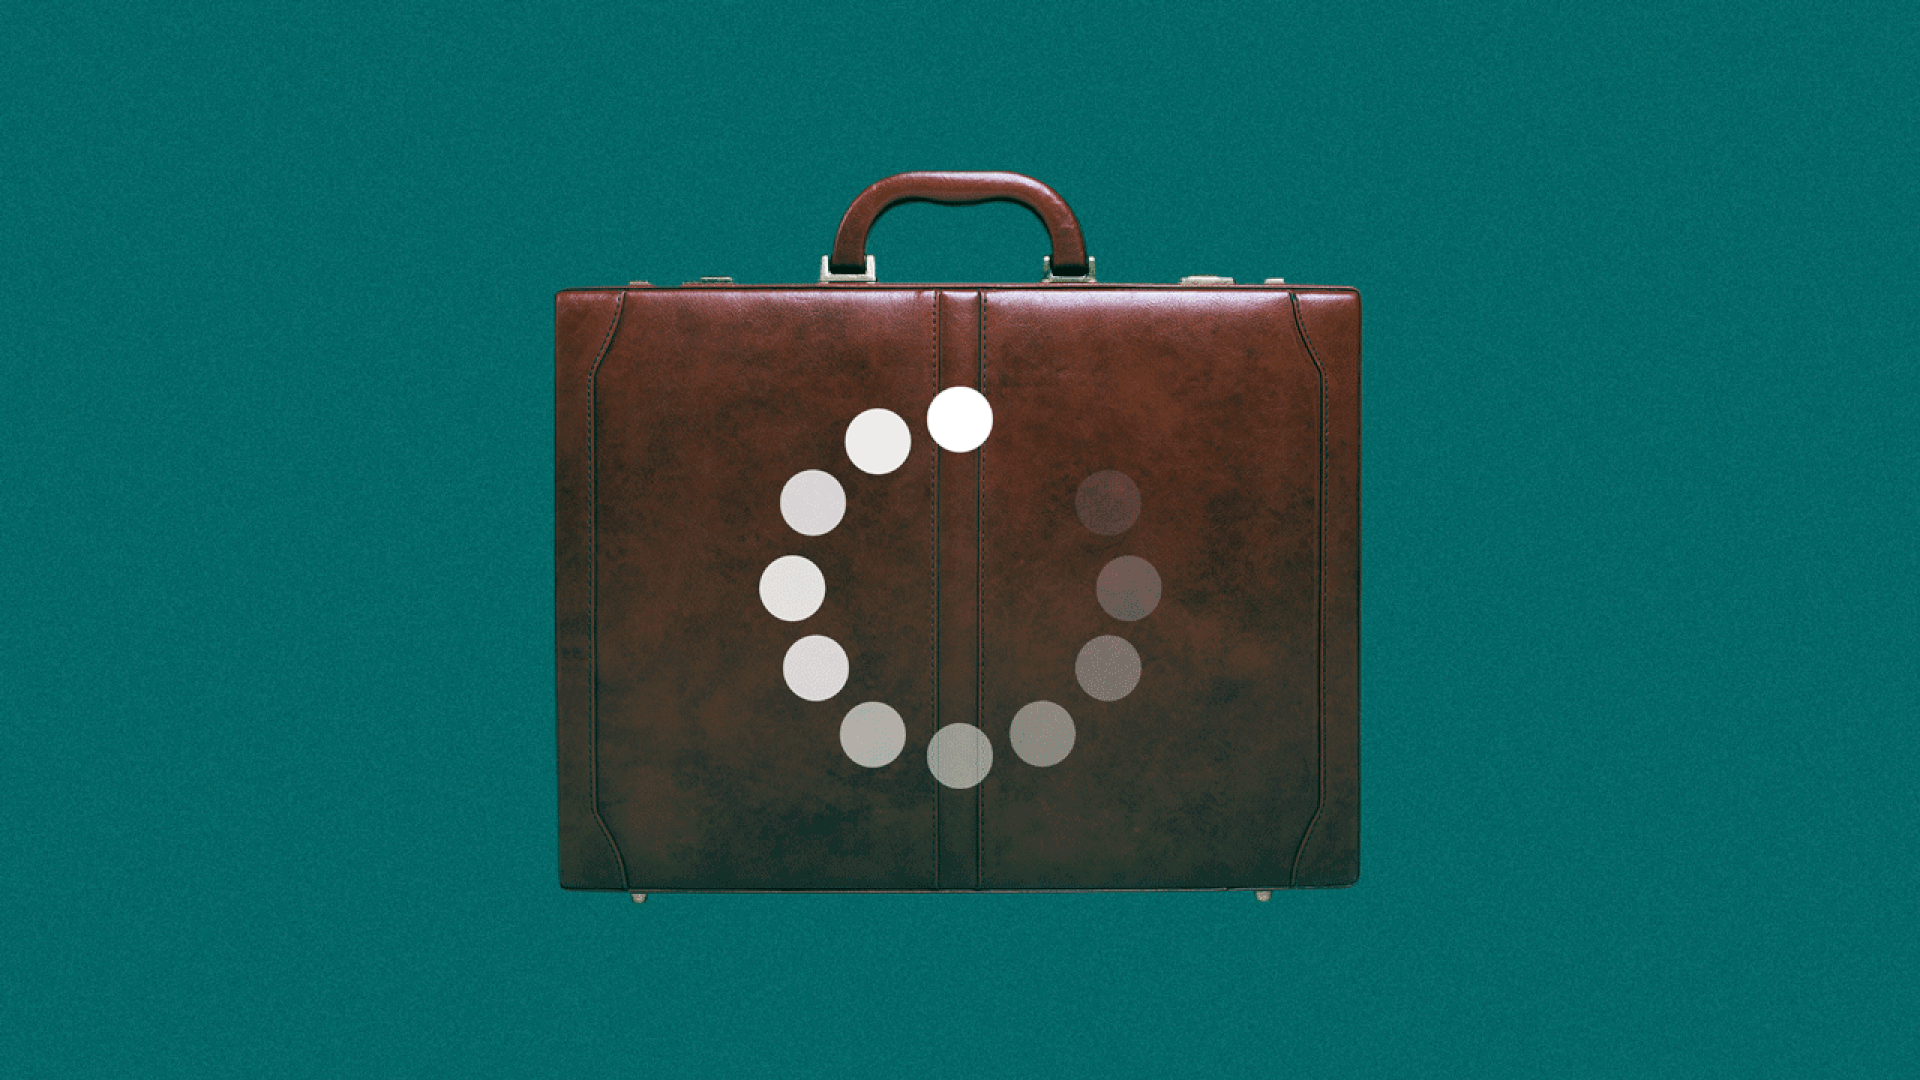 Illustration of a buffering briefcase.